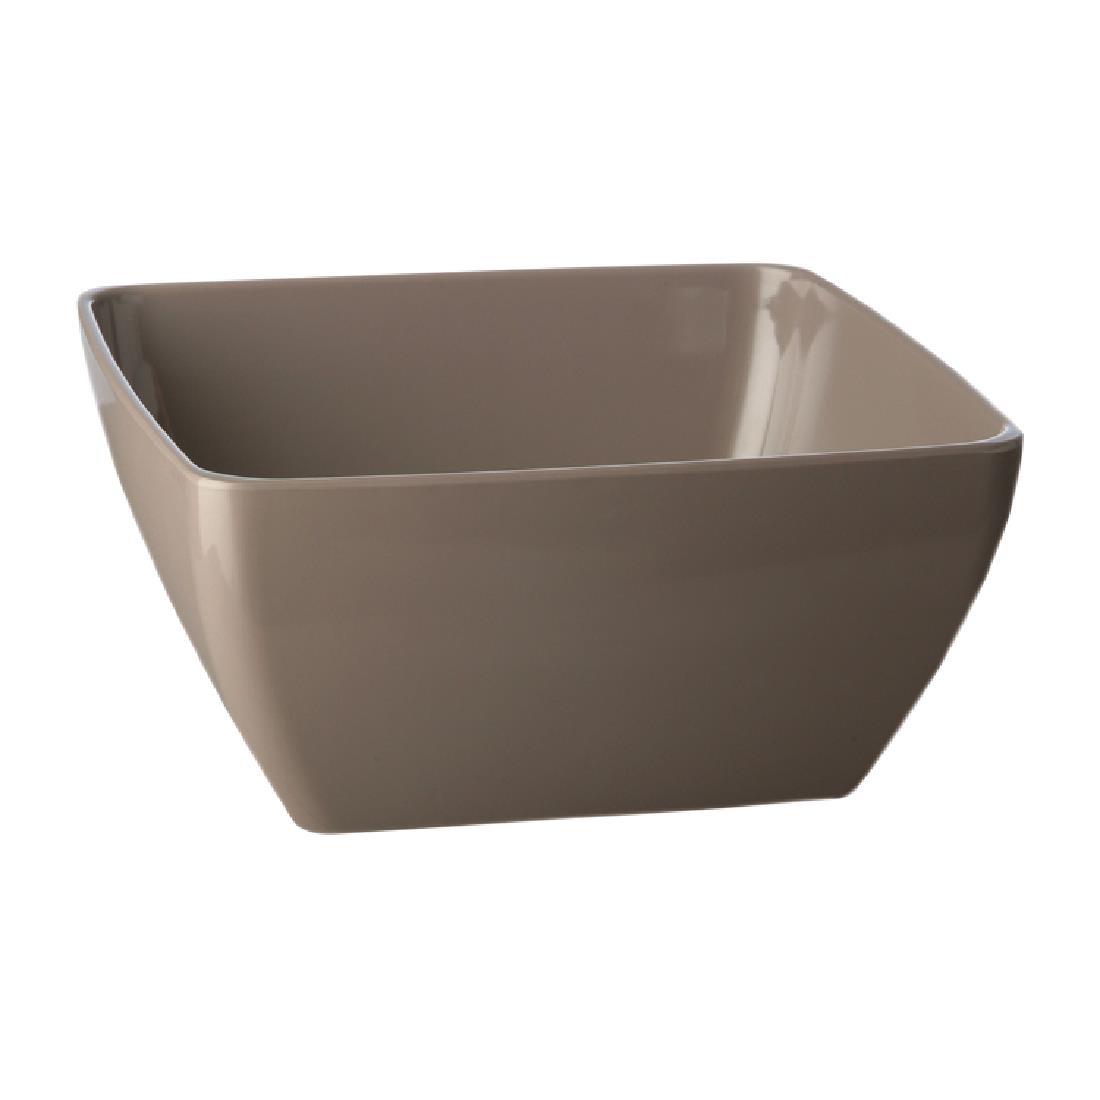 APS Pure Bowl Taupe 125mm - Each - DS014 - 1